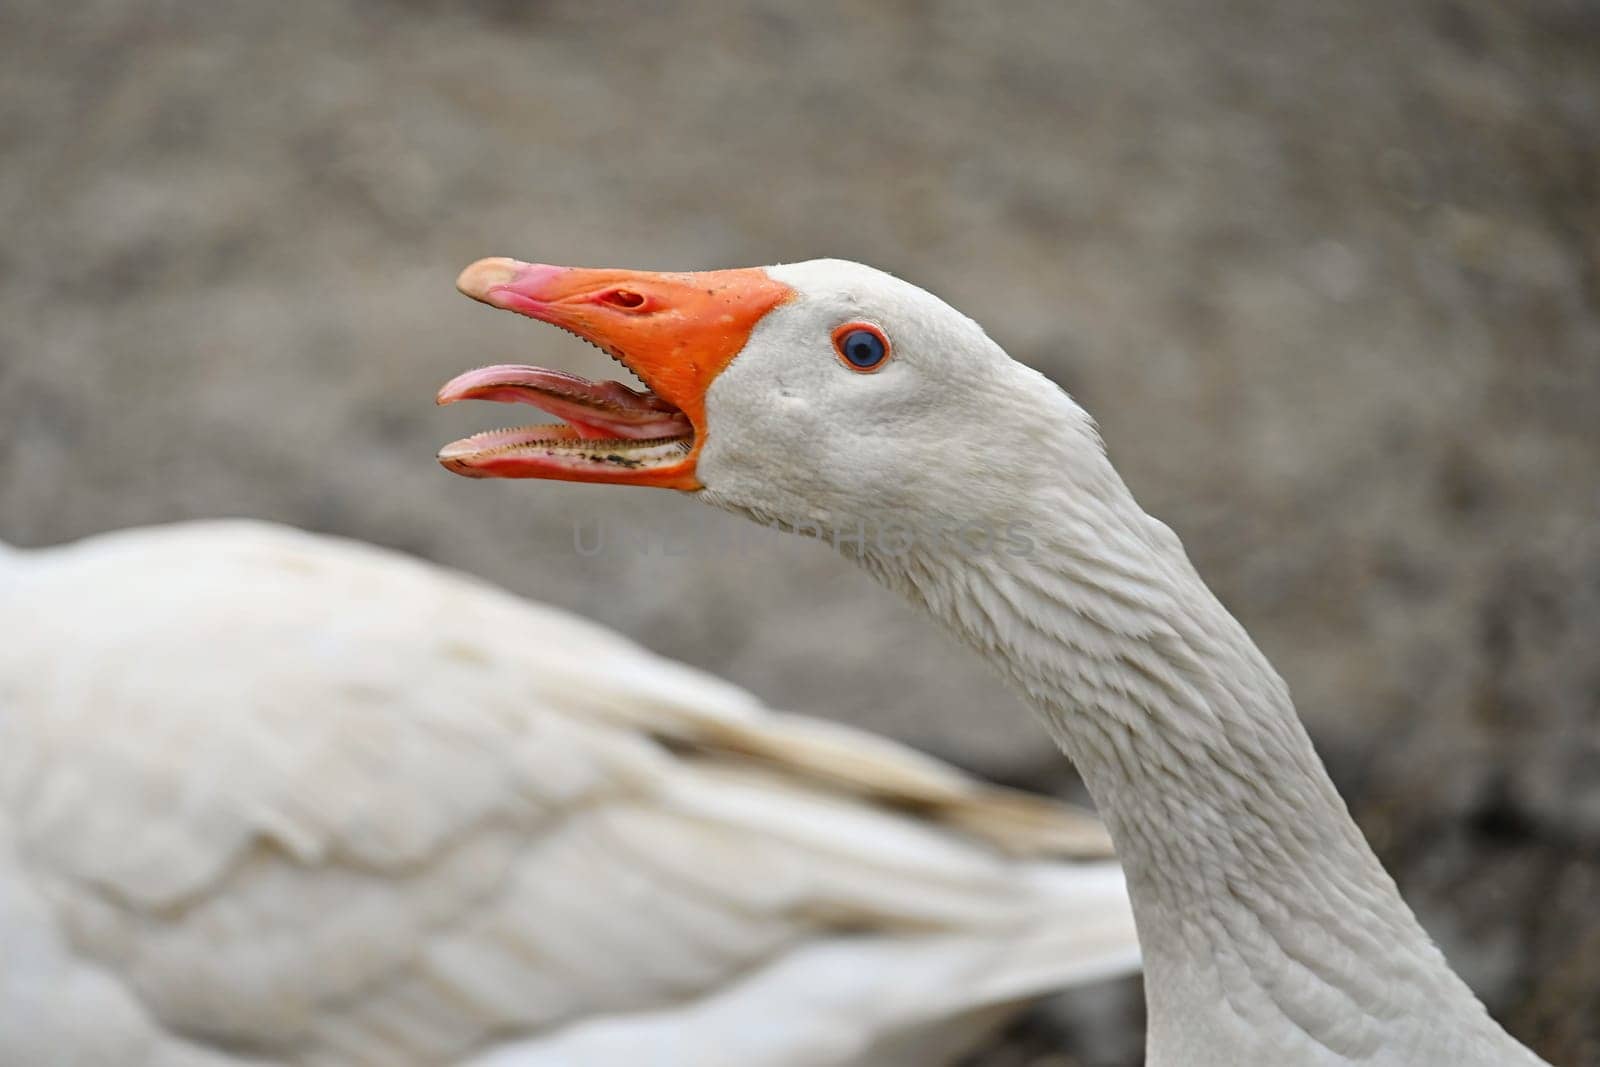 Domestic goose. Funny portrait of an animal on a farm.